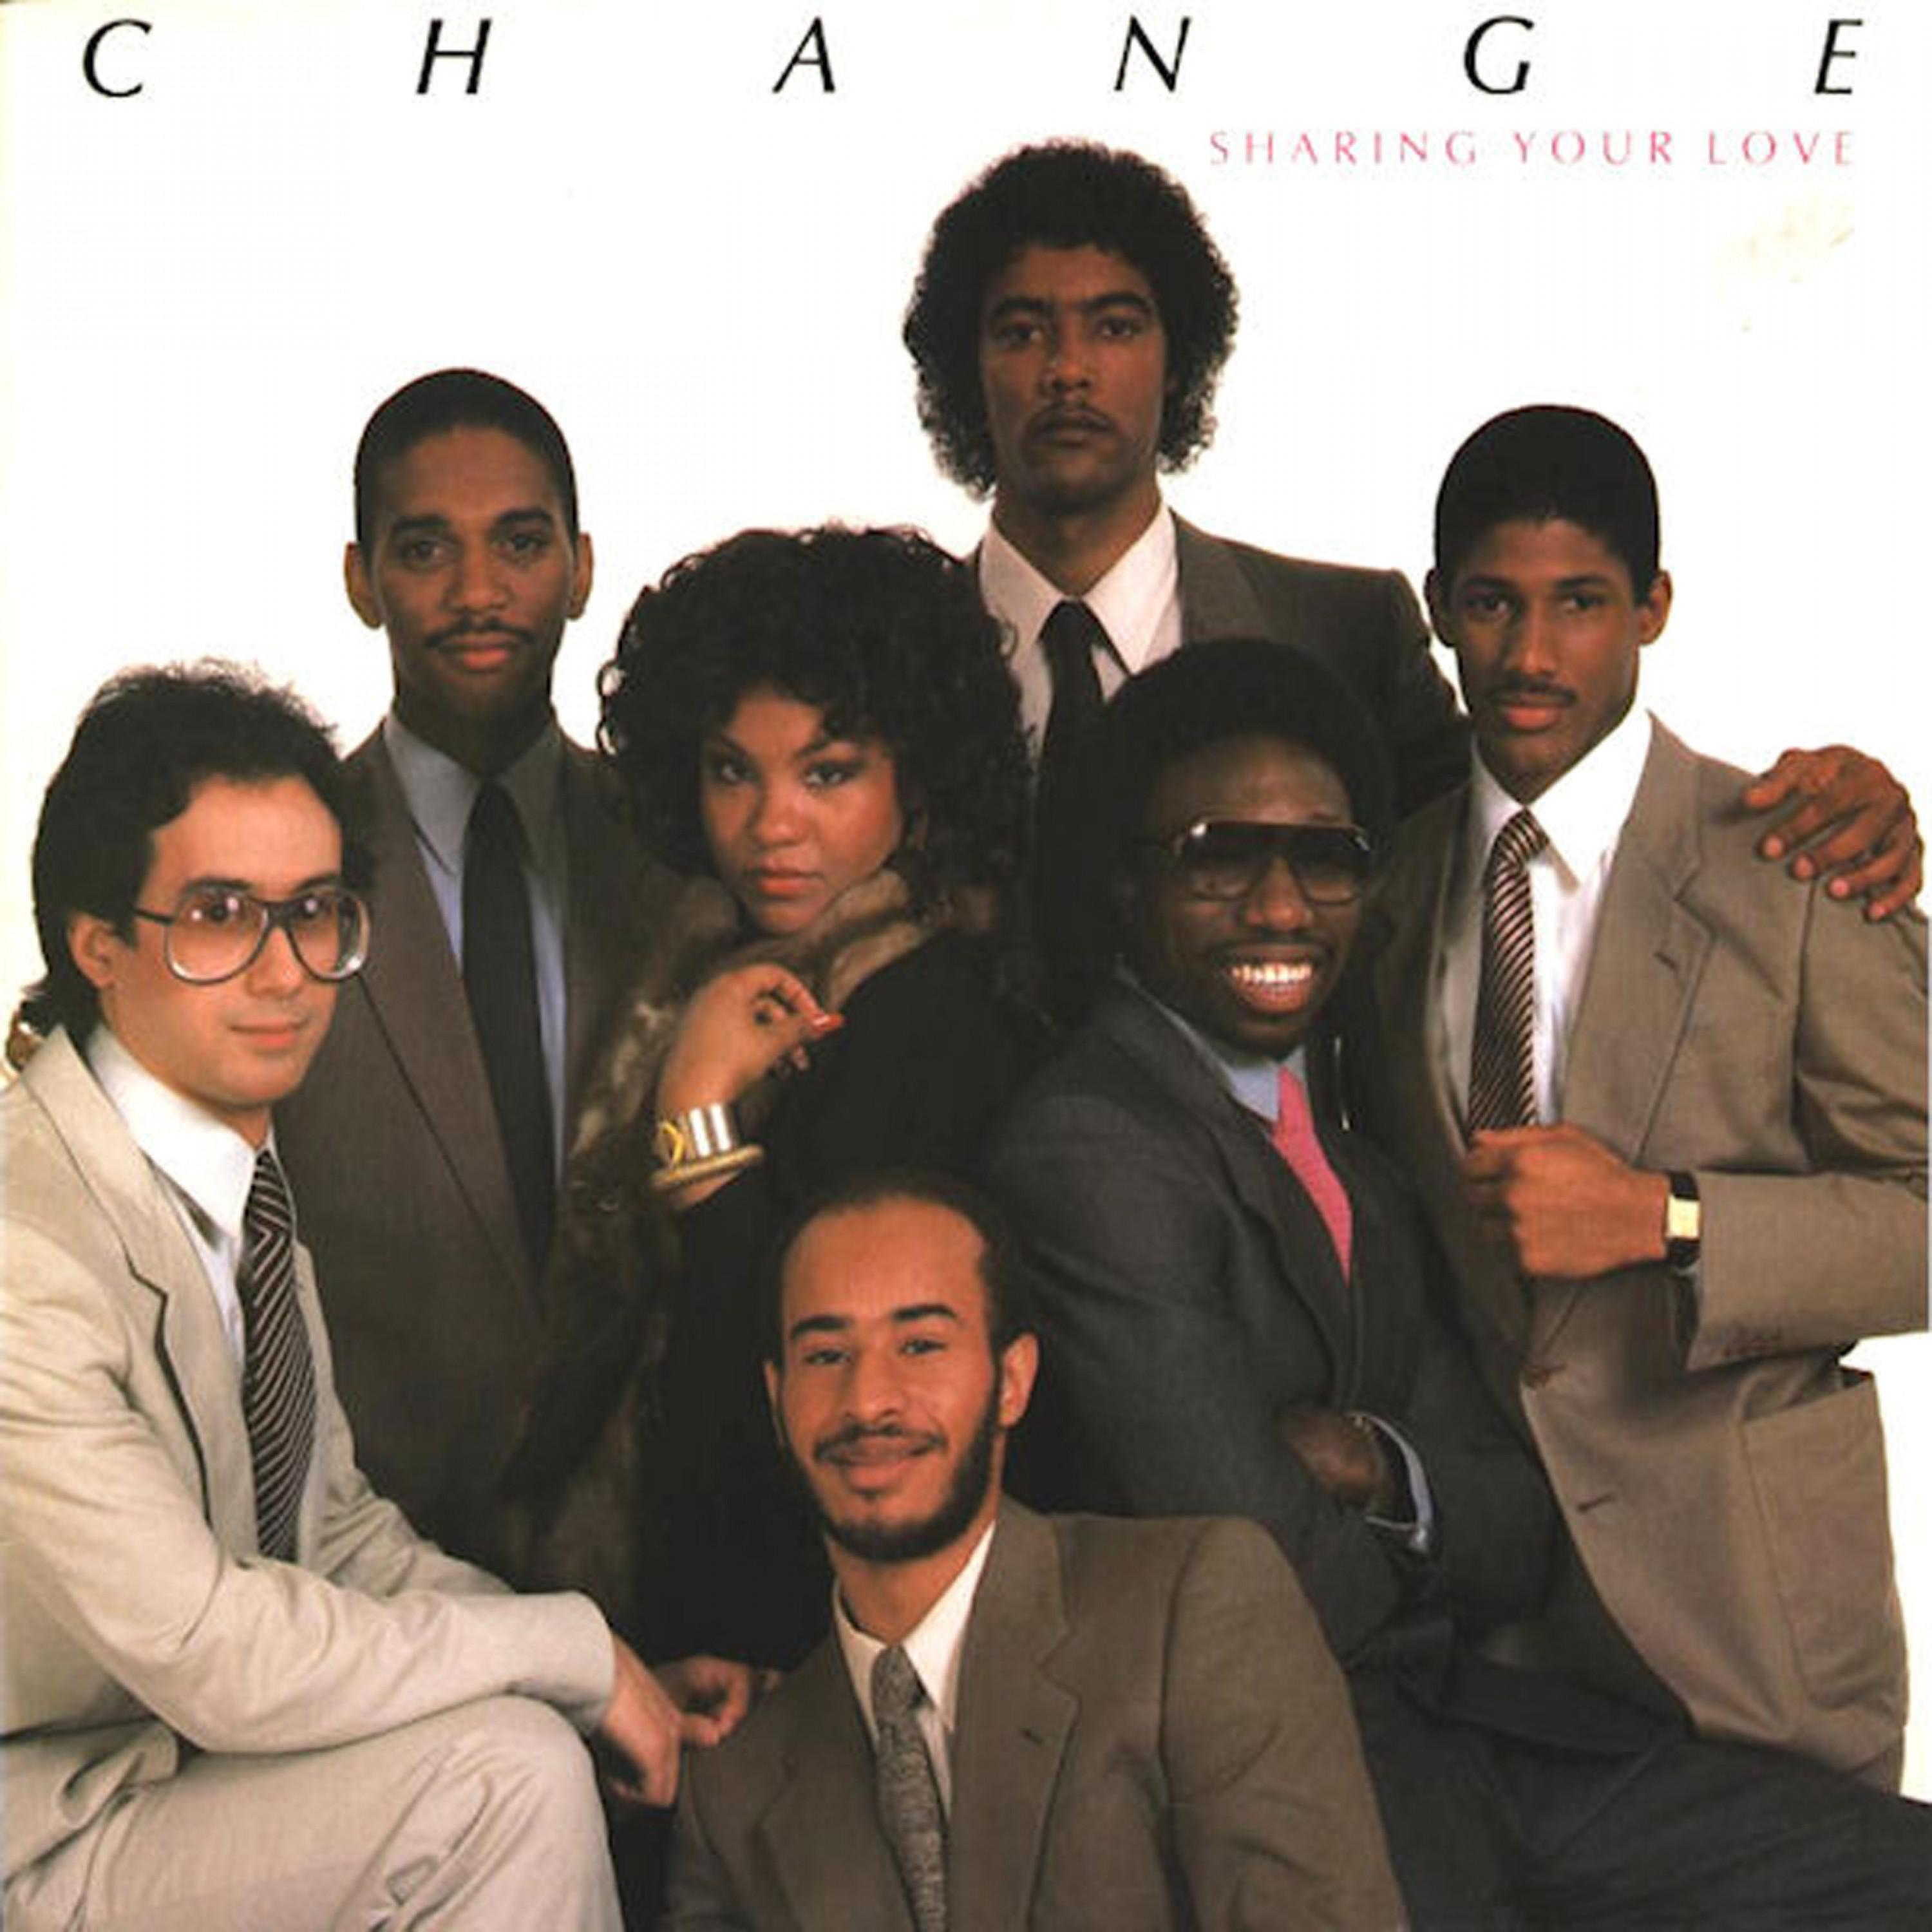 The Very Best in You (Full Length Album Mix)歌词 歌手Change-专辑Sharing Your Love-单曲《The Very Best in You (Full Length Album Mix)》LRC歌词下载